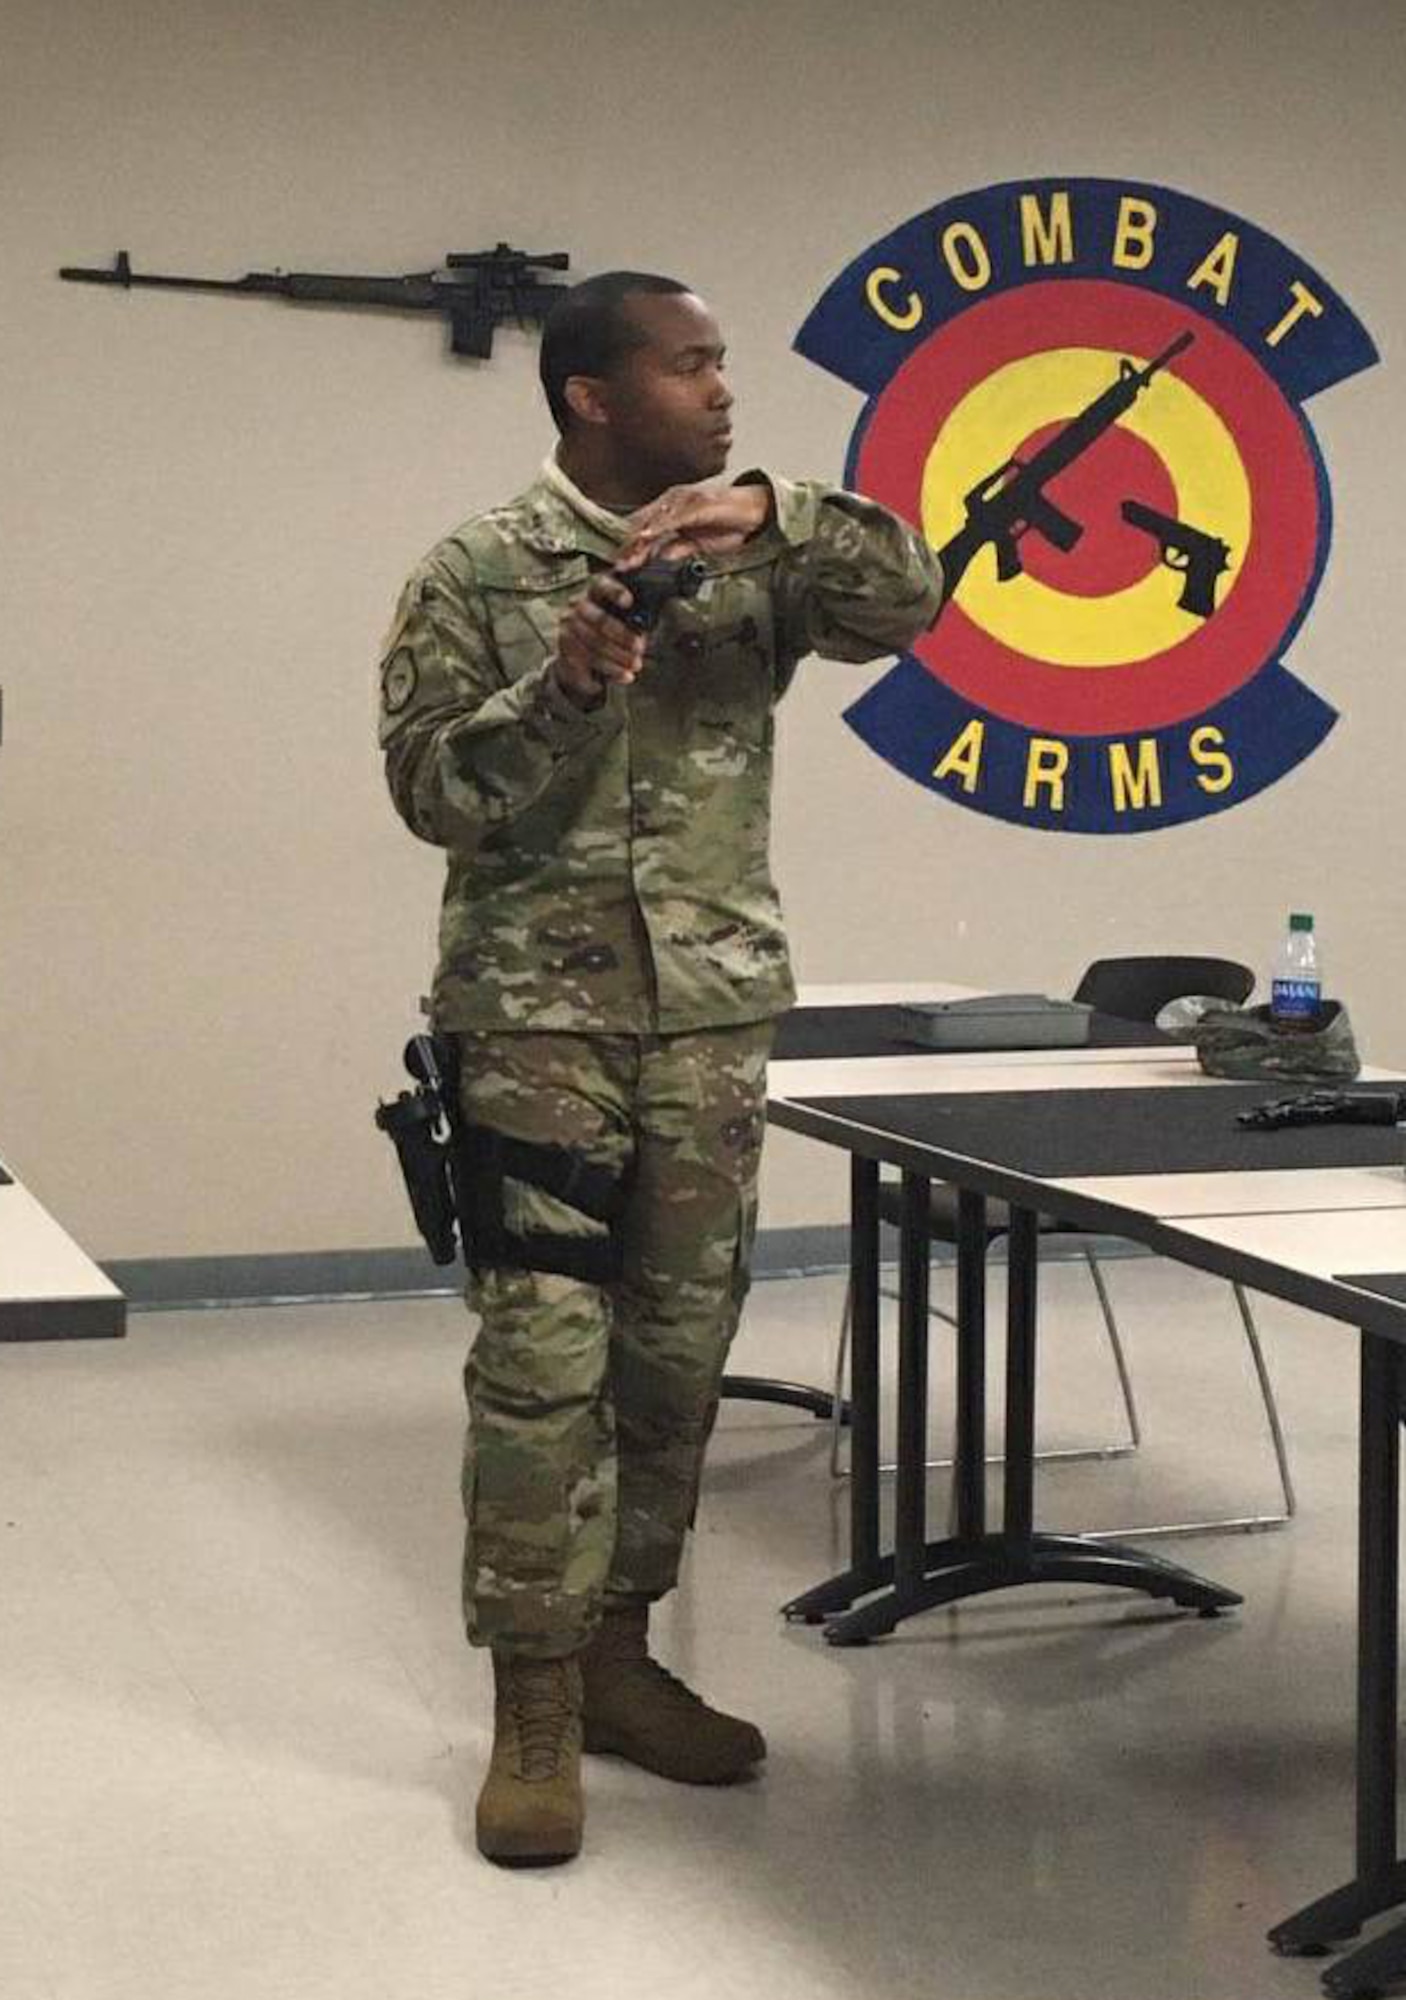 Tech. Sgt. Derrick Tolbert, 403rd Security Forces Squadron combat arms noncommissioned officer in charge, shows the proper procedures for handling a M9 firearm during a class April 9, 2020. The students were then taken to the indoor firing range to do the weapon qualification course at Keesler Air Force Base, Miss. (U.S. Air Force courtesy photo)